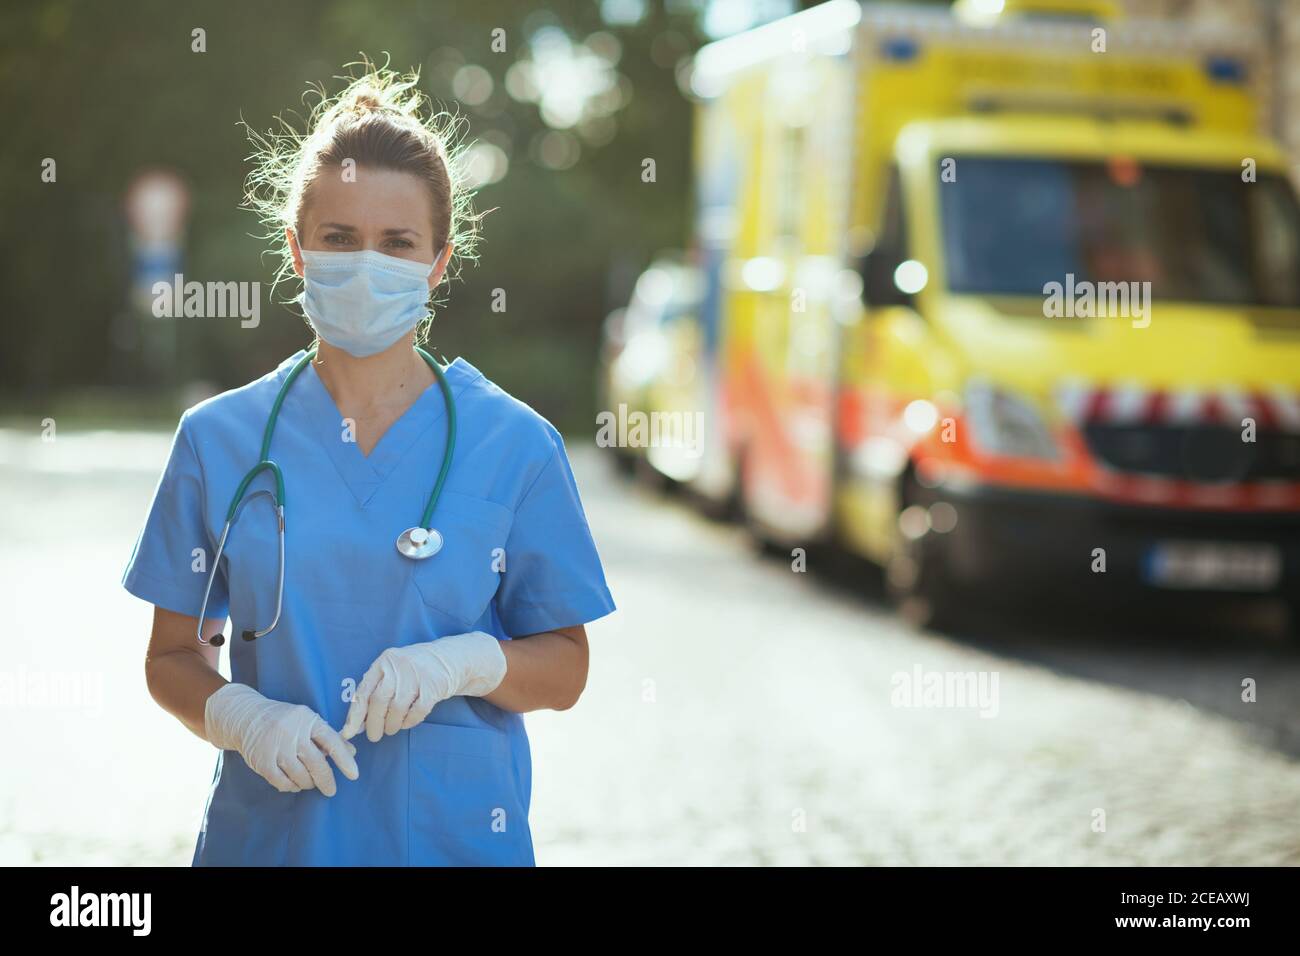 covid-19 pandemic. Portrait of modern medical doctor woman in uniform with stethoscope and medical mask outdoors near ambulance. Stock Photo